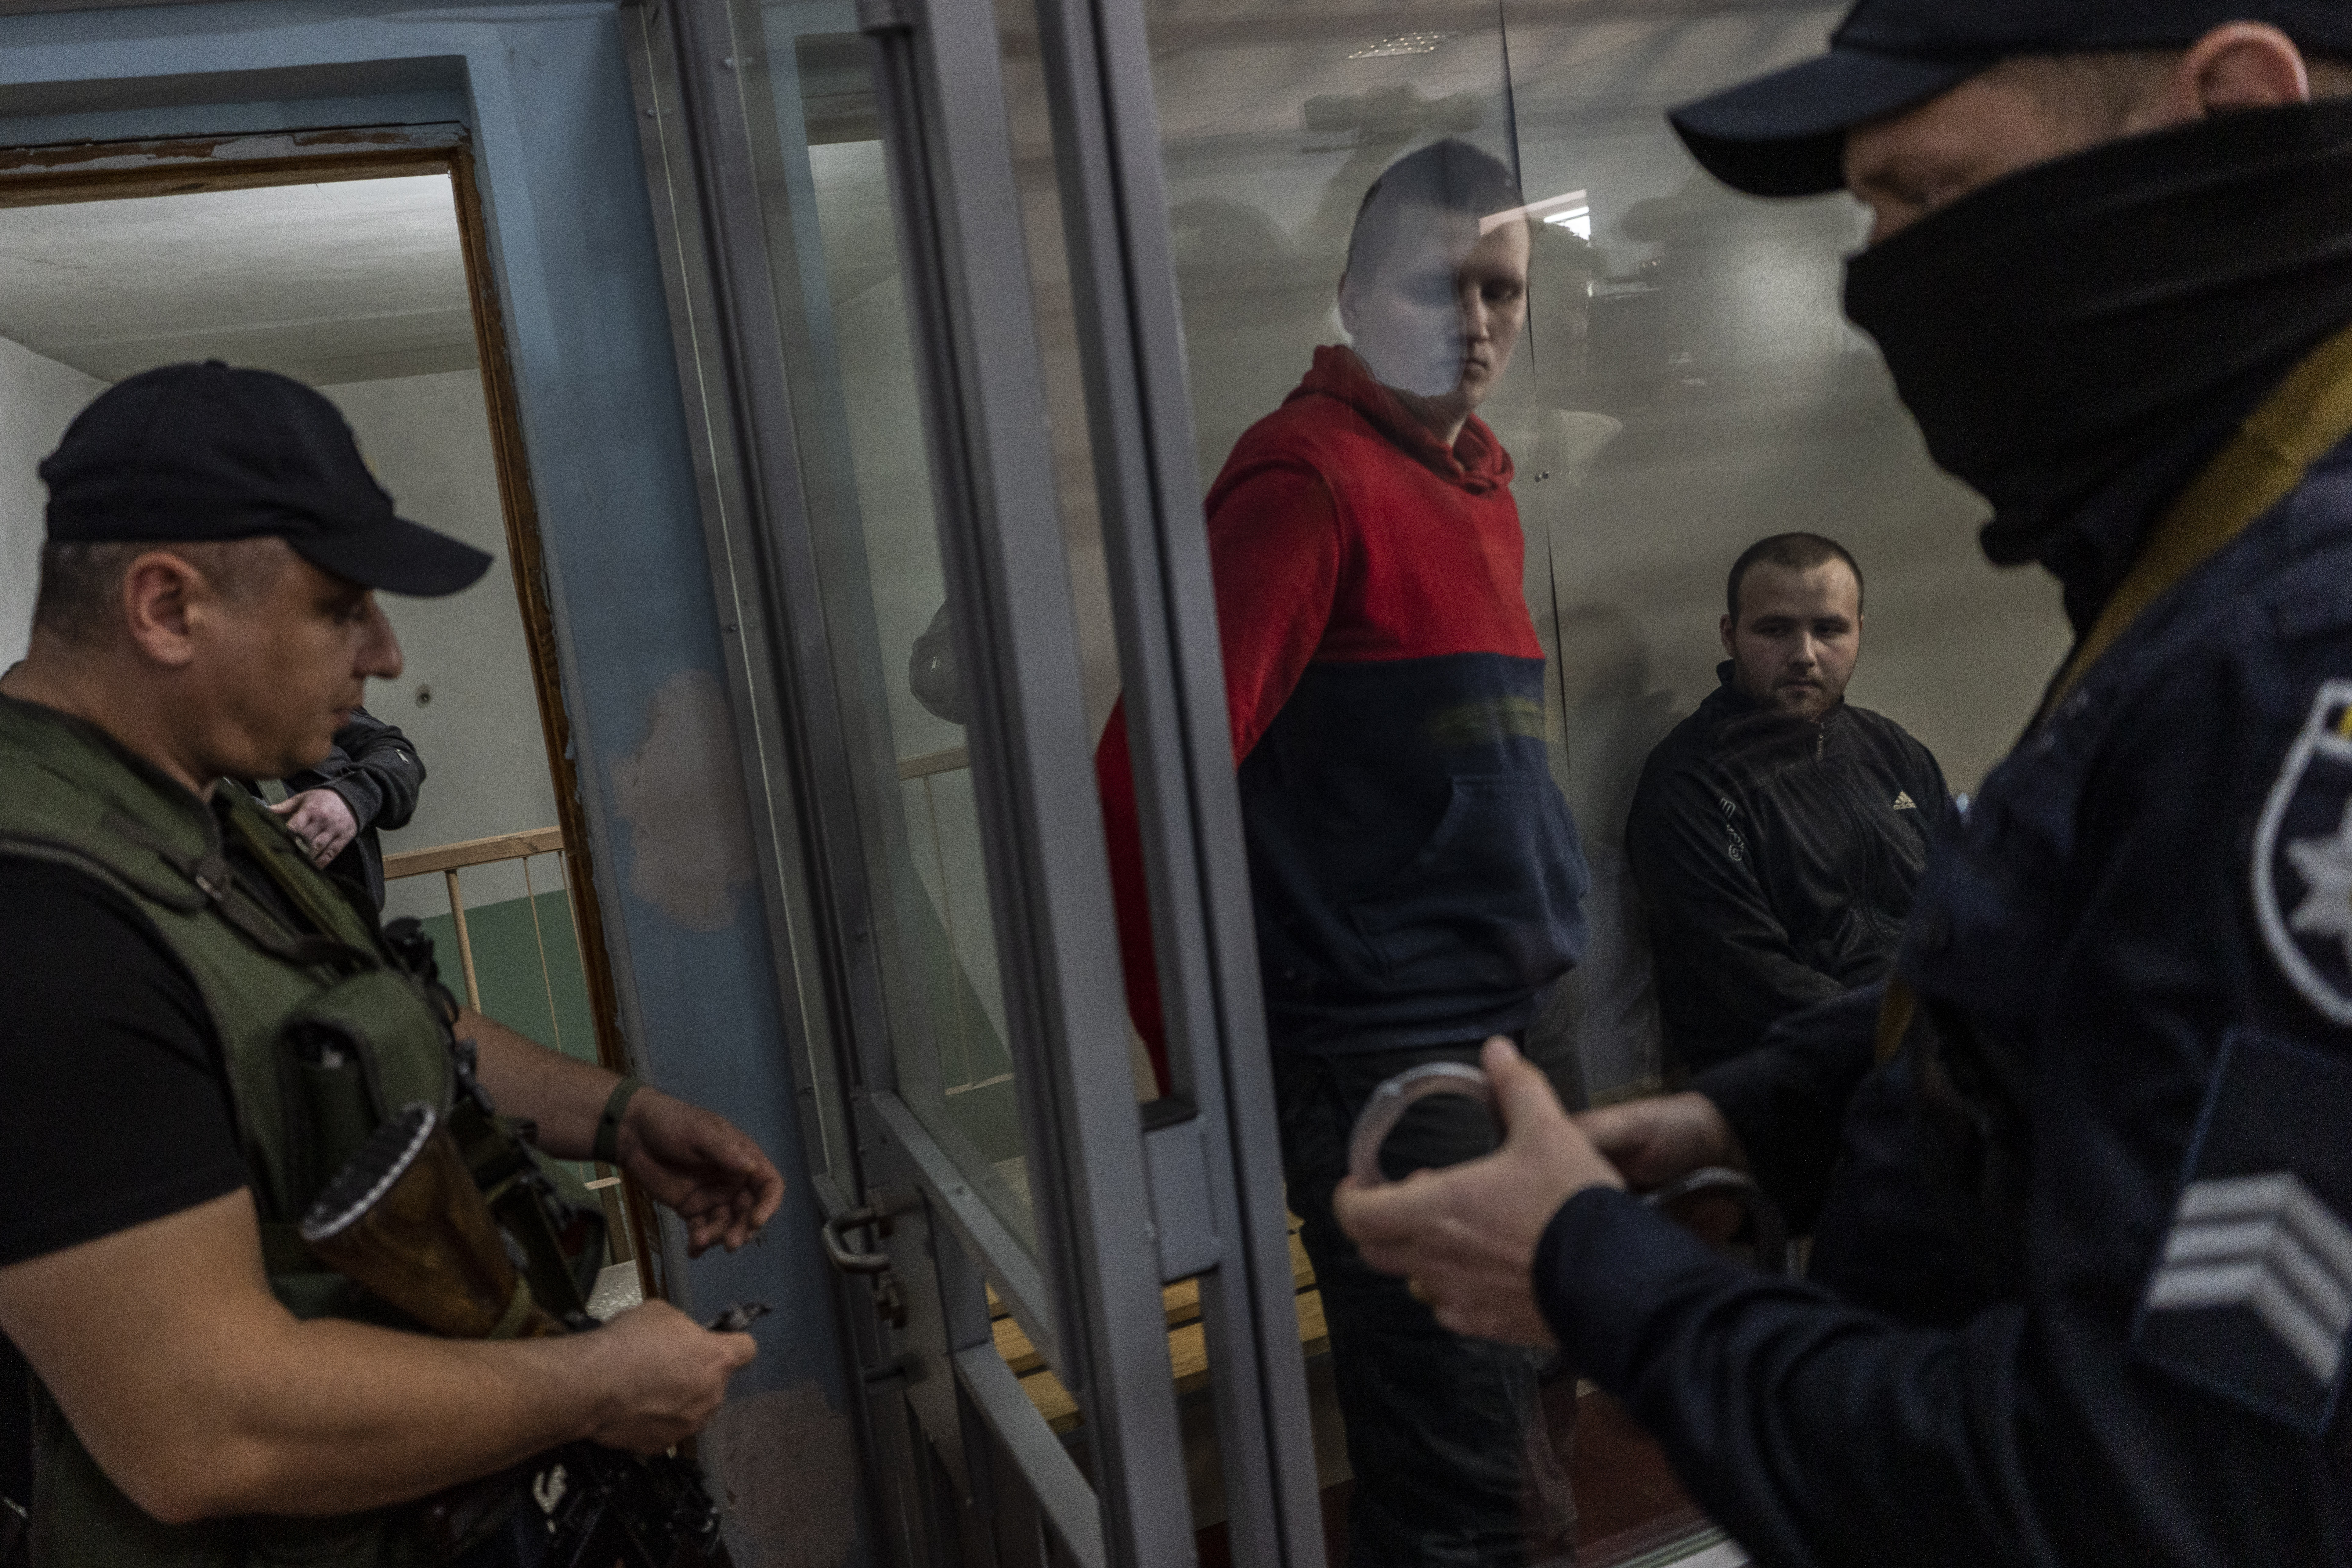 Russian soldiers Alexander Ivanov and Alexander Bobykin, center, in the courtroom after their trial hearing in Kotelva, Ukraine, on May 26. 